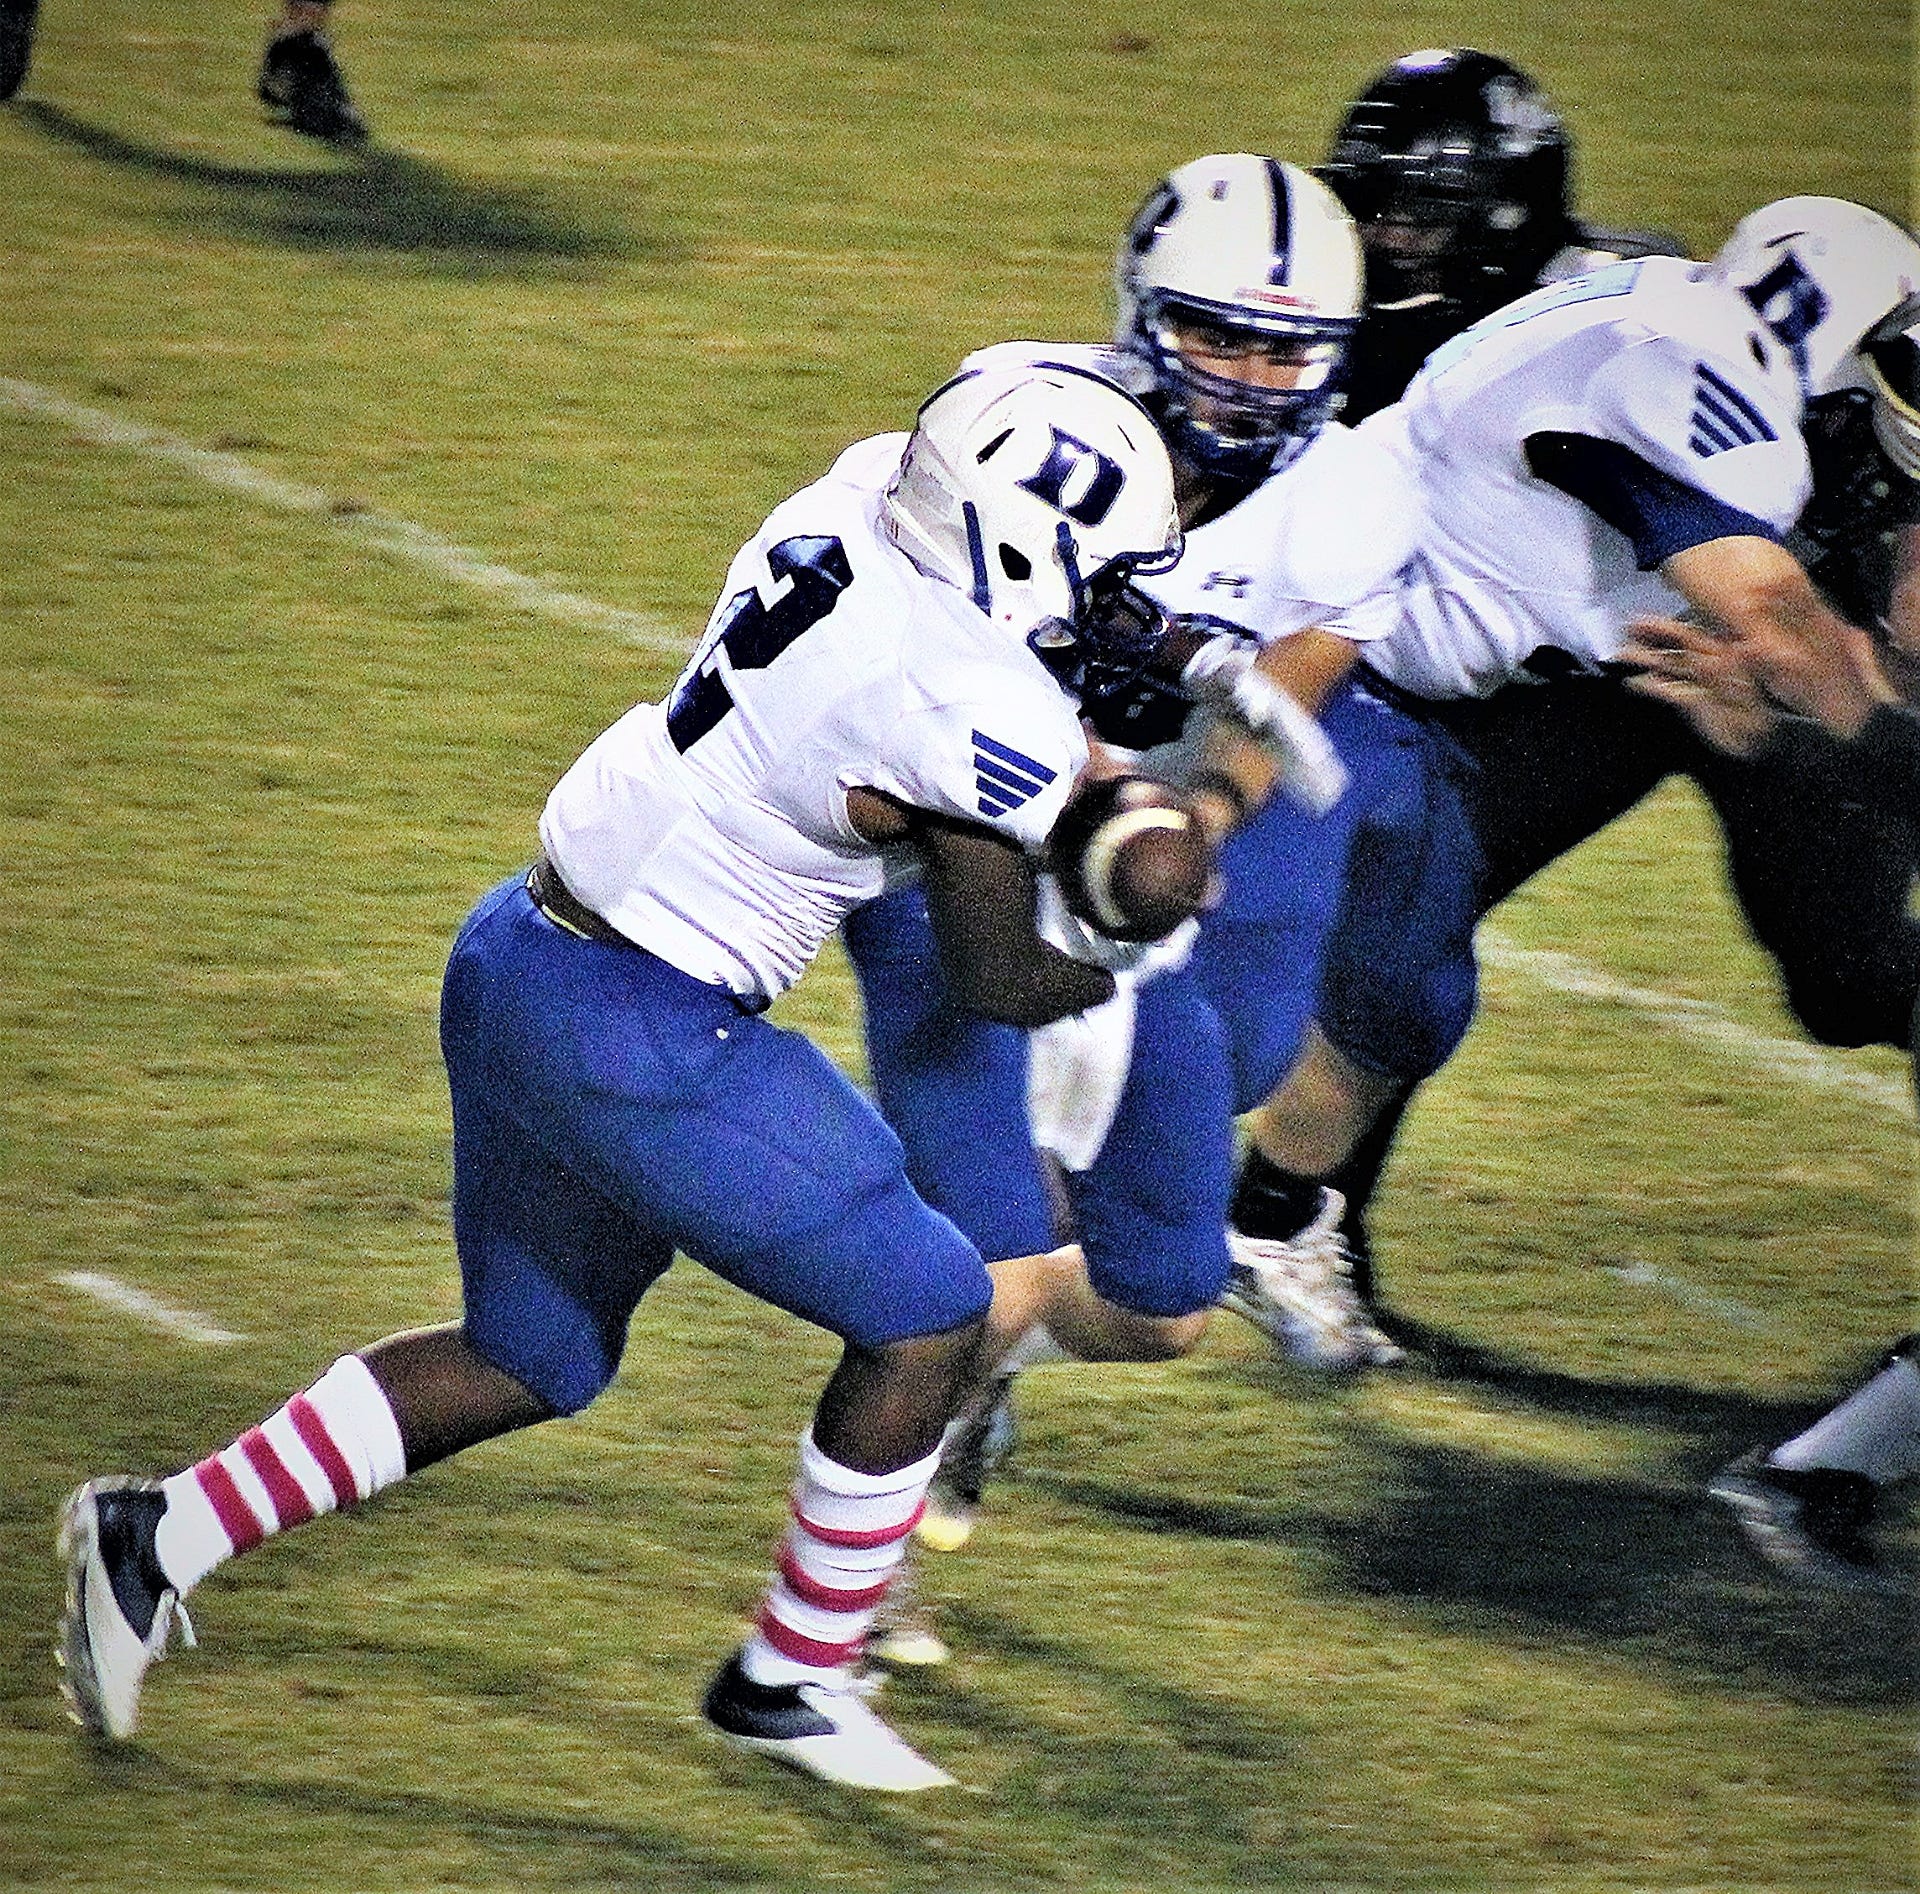 DeRidder running back Alex Archield (2) scored two touchdowns Friday night in a 49-41 loss to the Leesville Wampus Cats in the Battle for the Hooper Trophy.